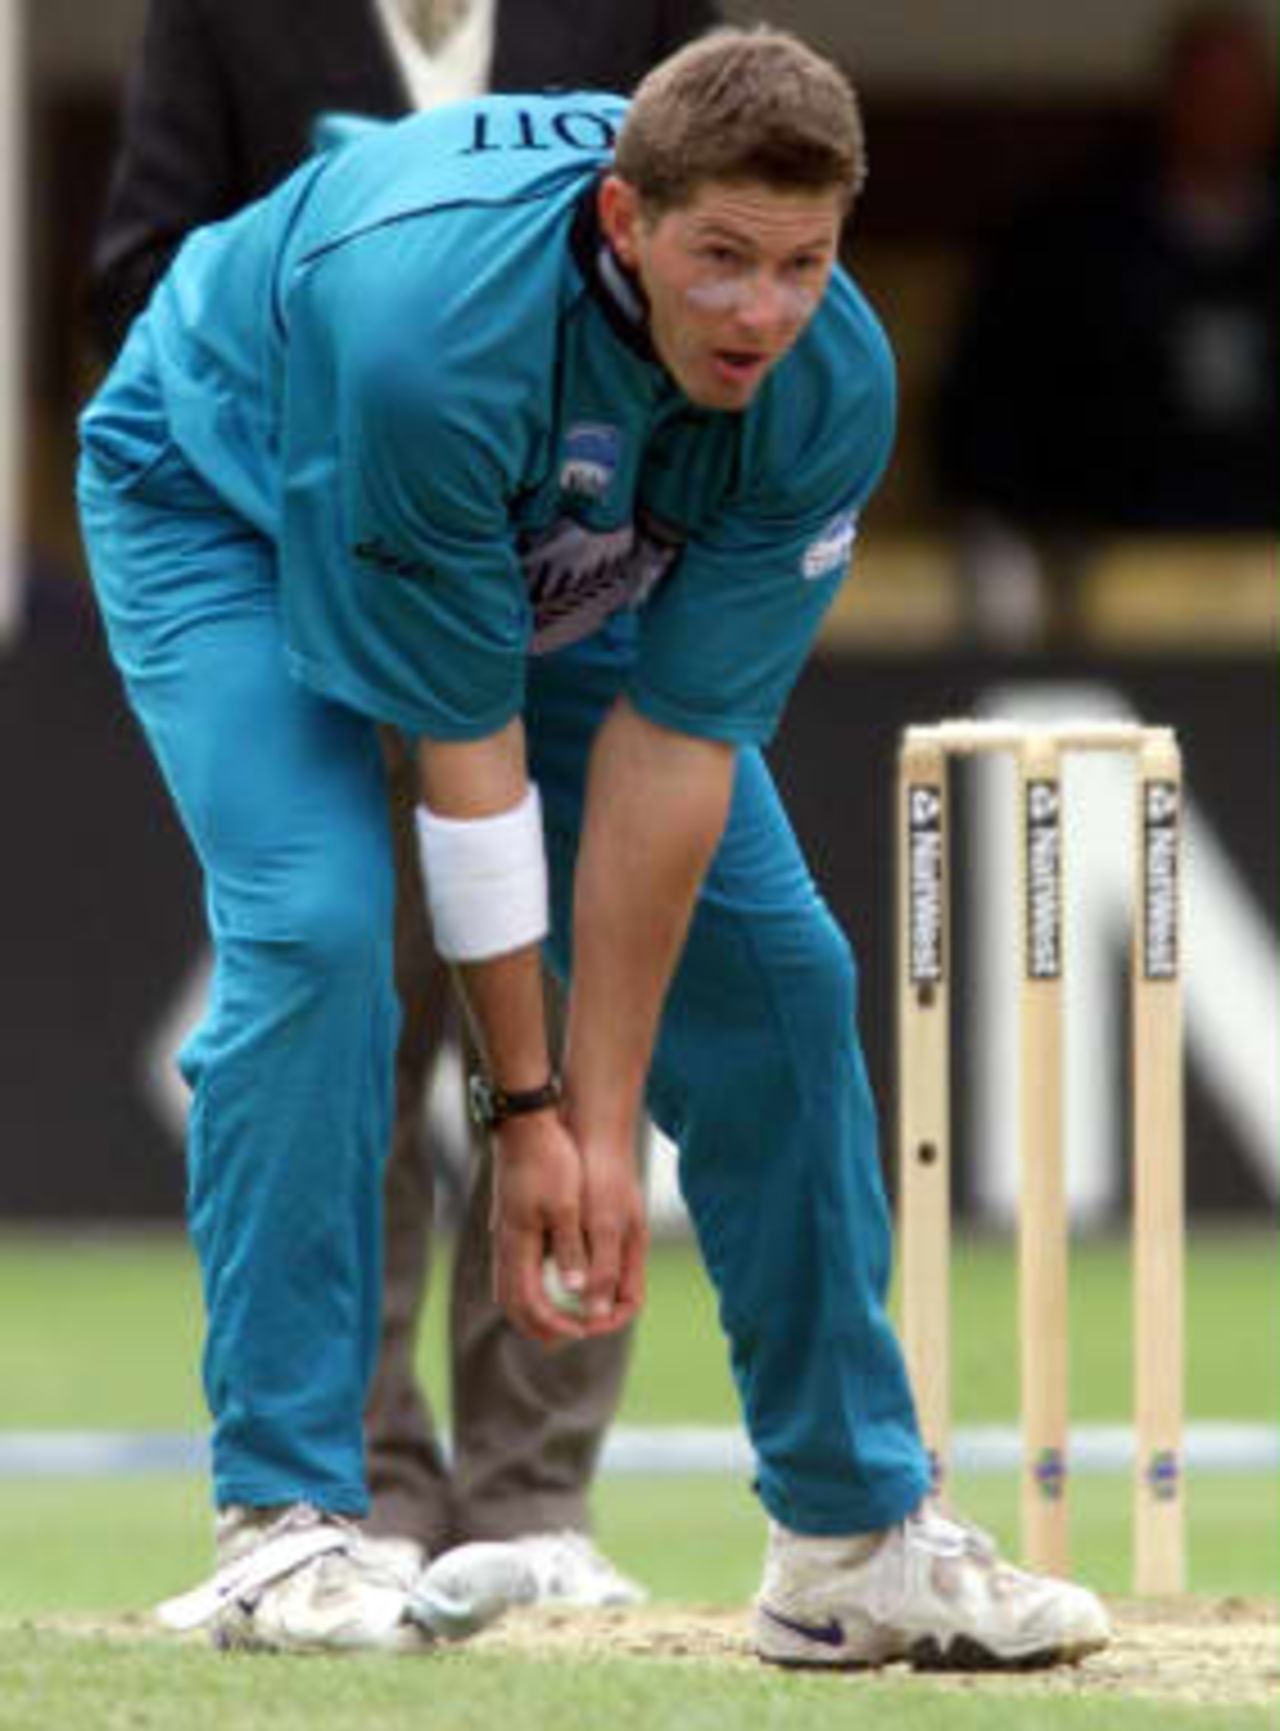 New Zealand bowler Geoff Allott looses his sock from the front of his right boot 10 June 99, during their Super Six match against South Africa in the Cricket World Cup at Edgbaston, Birmingham